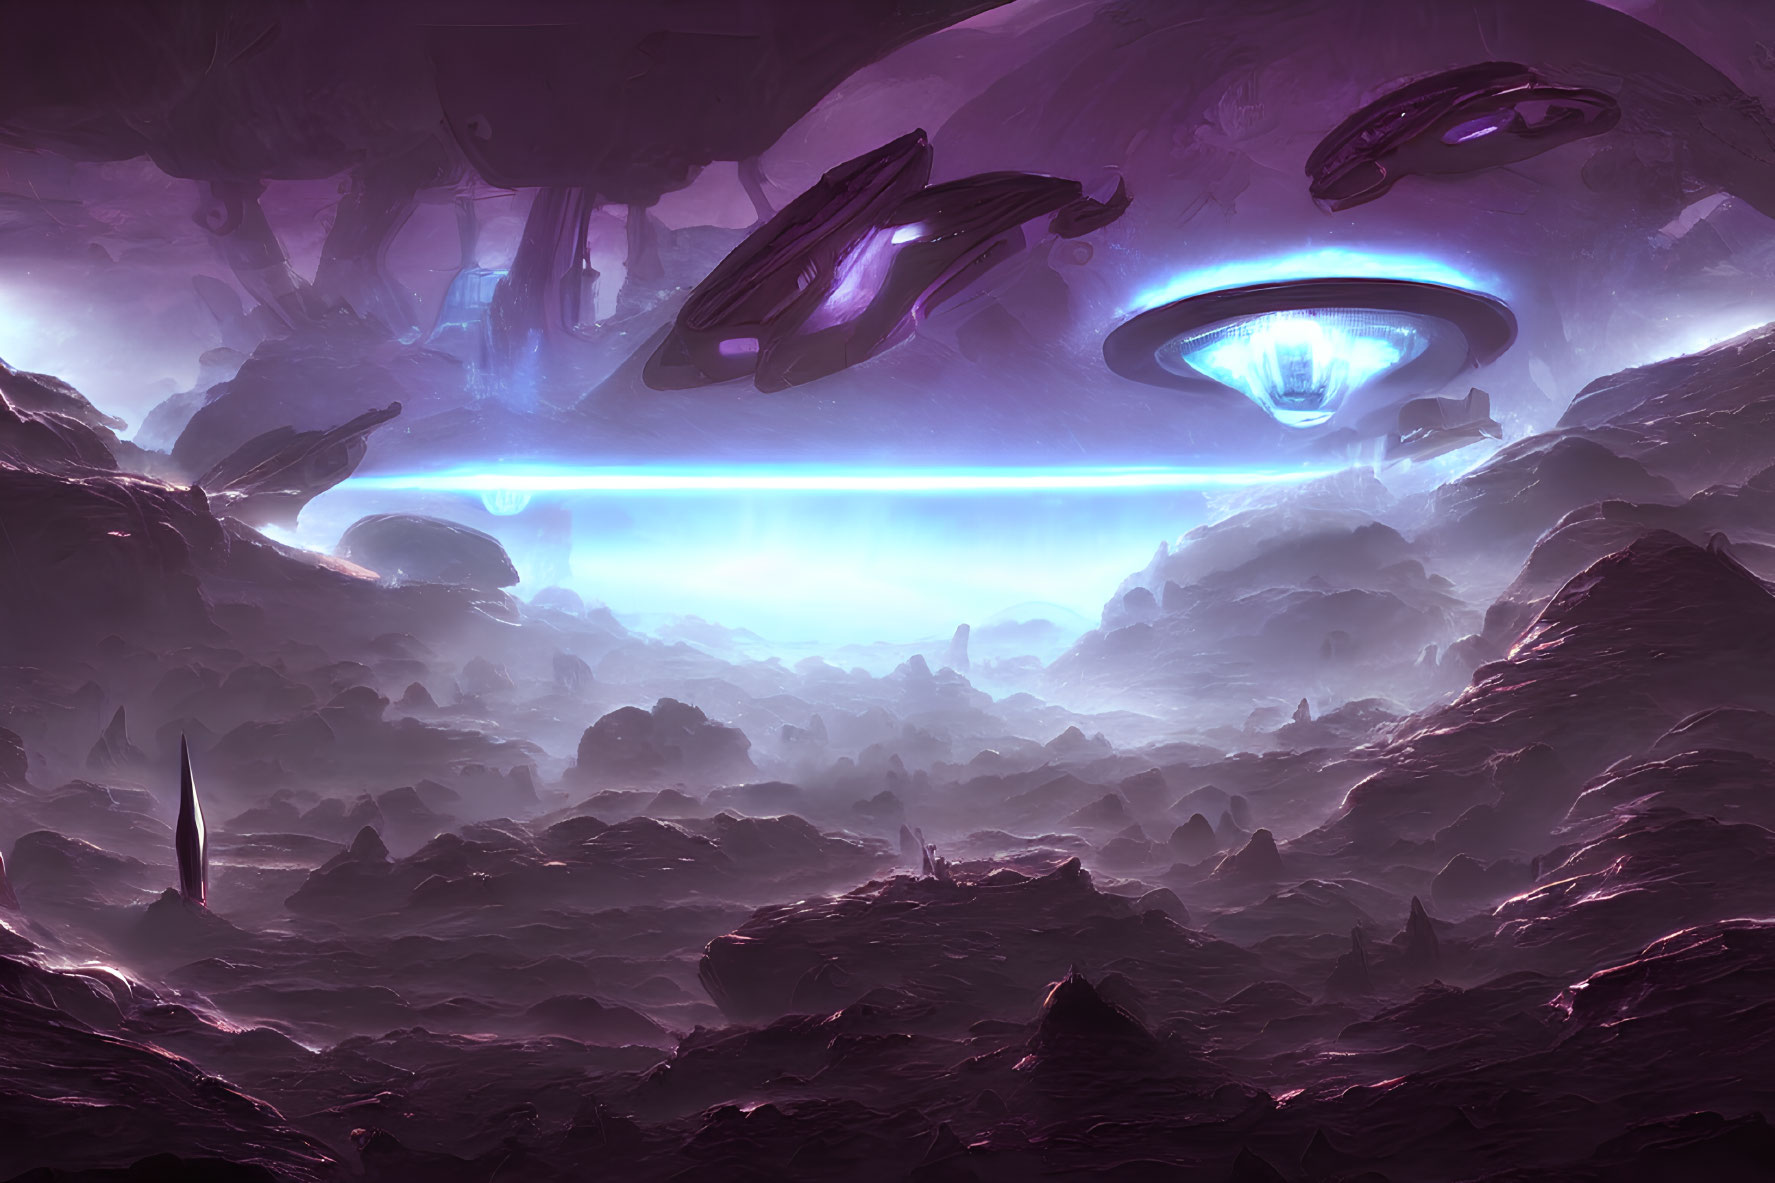 Futuristic sci-fi landscape with towering rock formations and mysterious spacecraft in purple sky